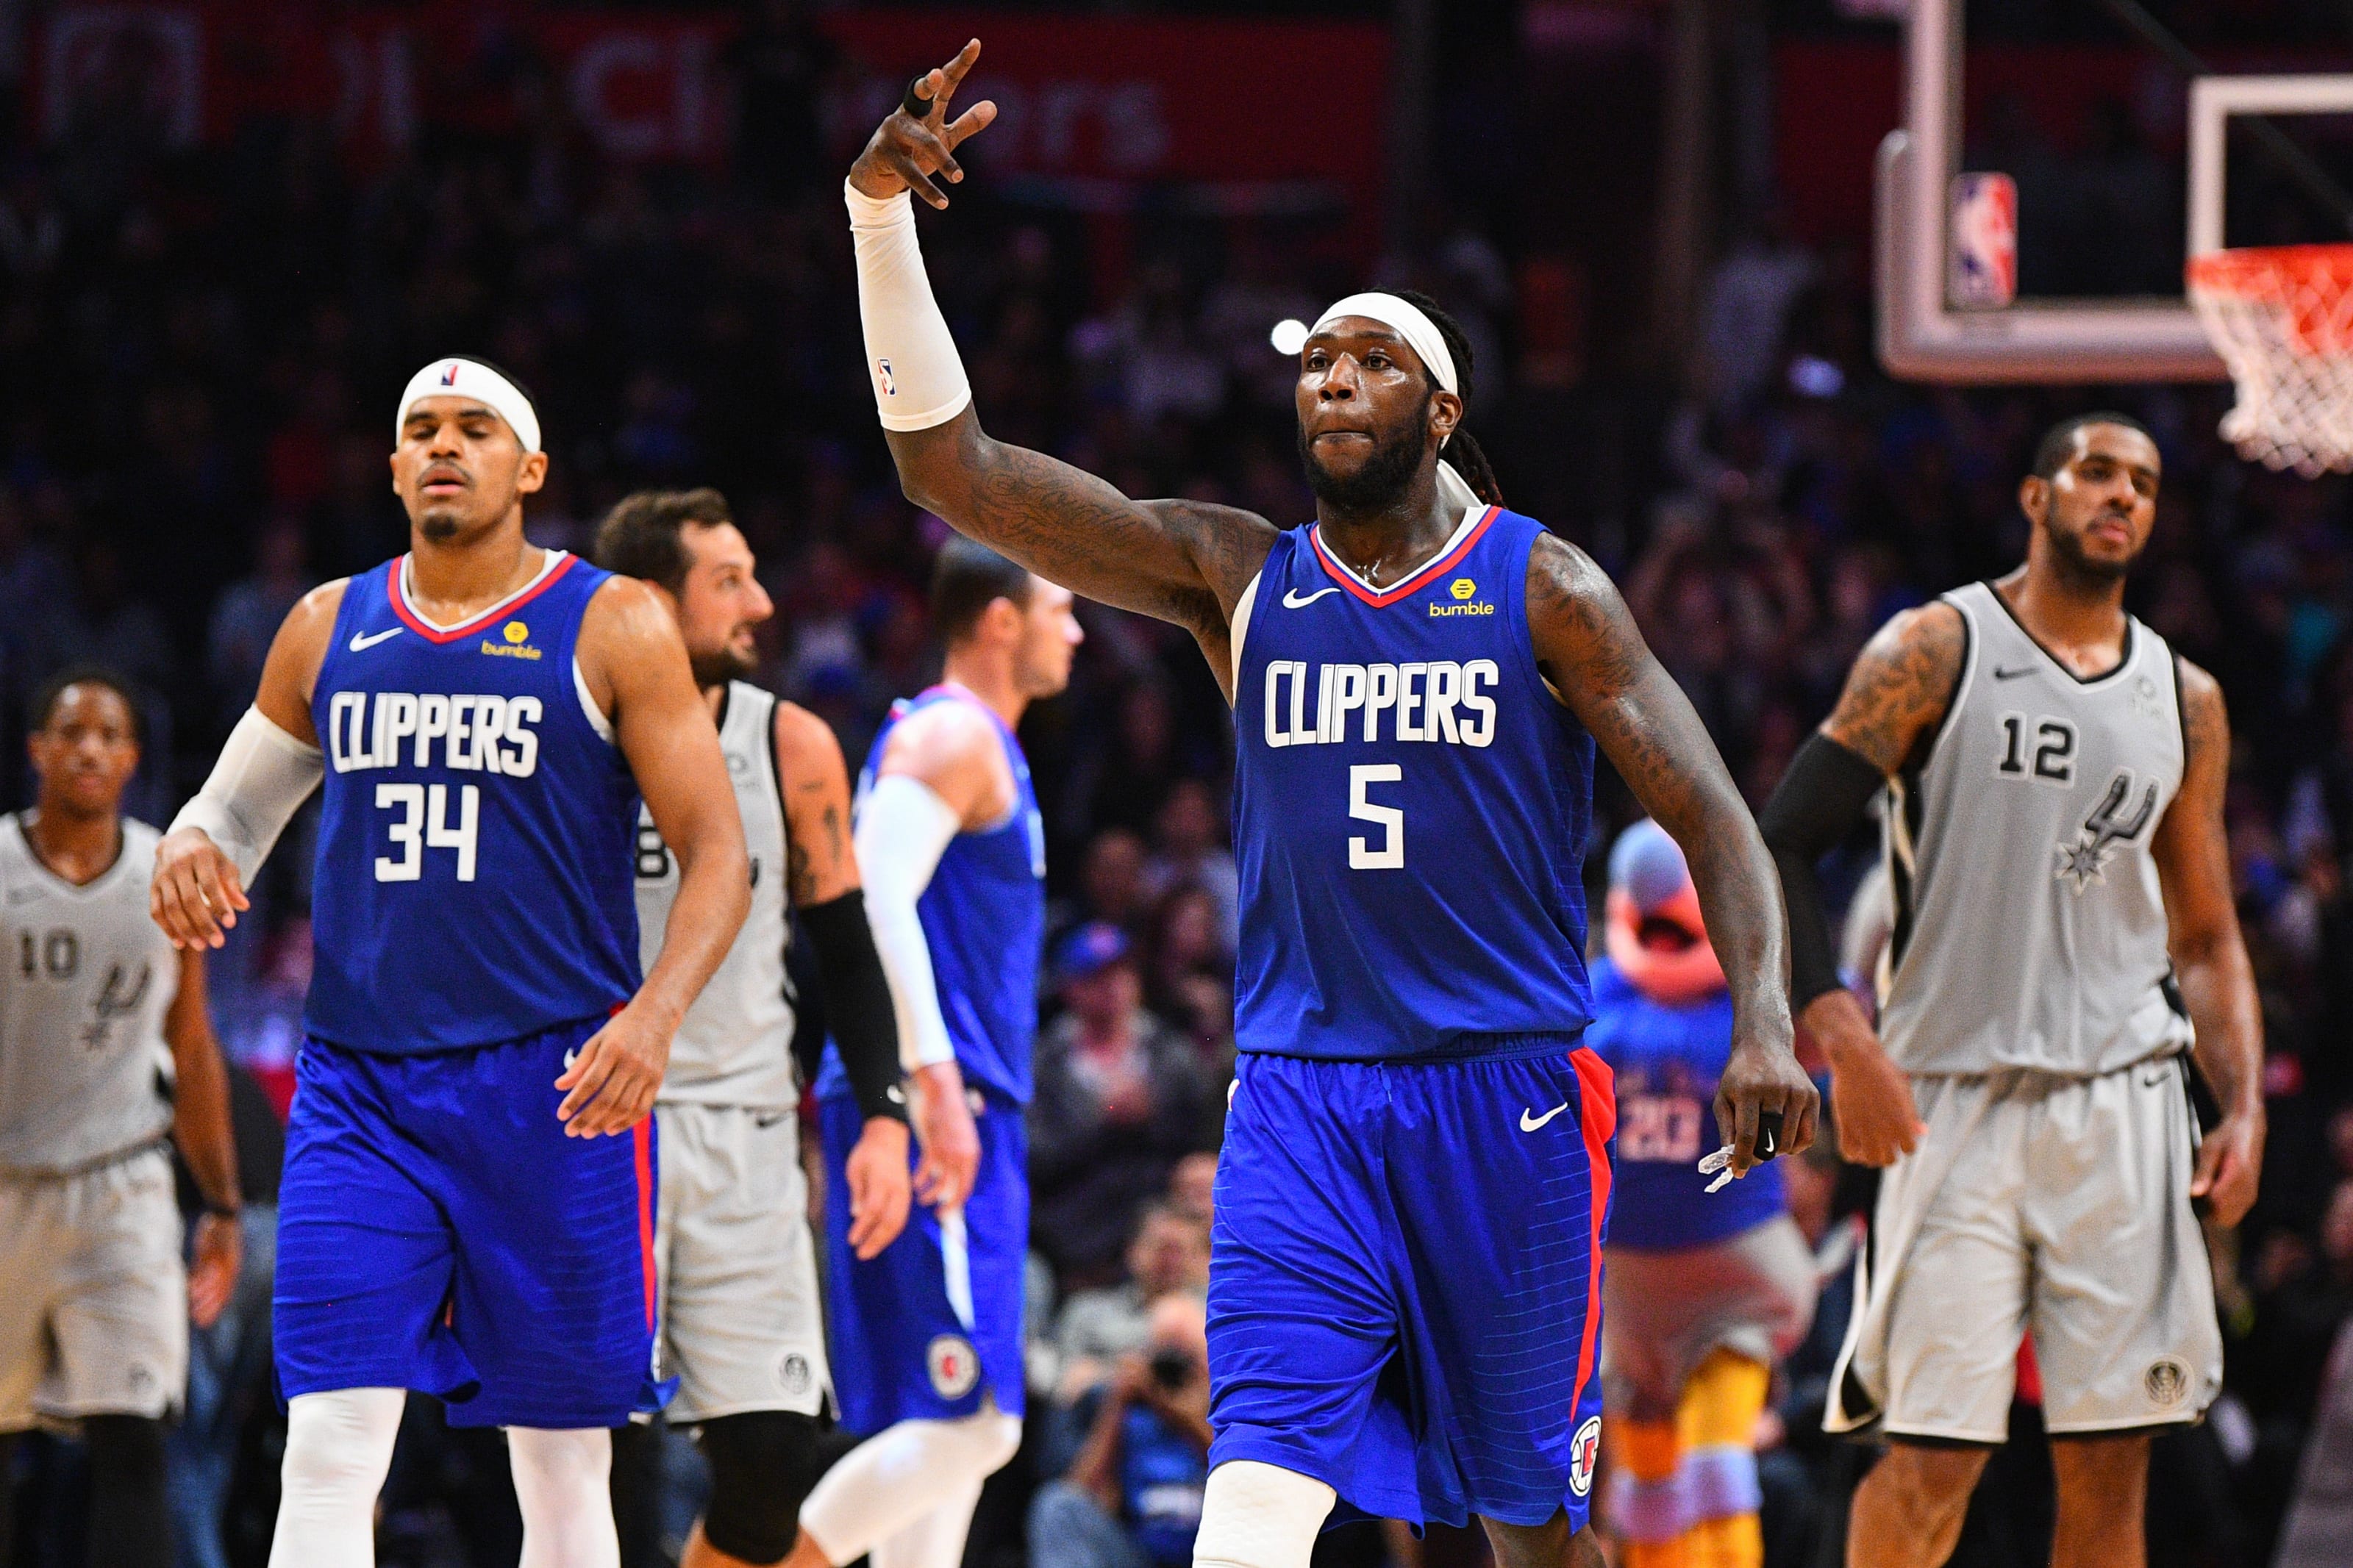 Ranking the Top 5 Uniforms in Los Angeles Clippers History